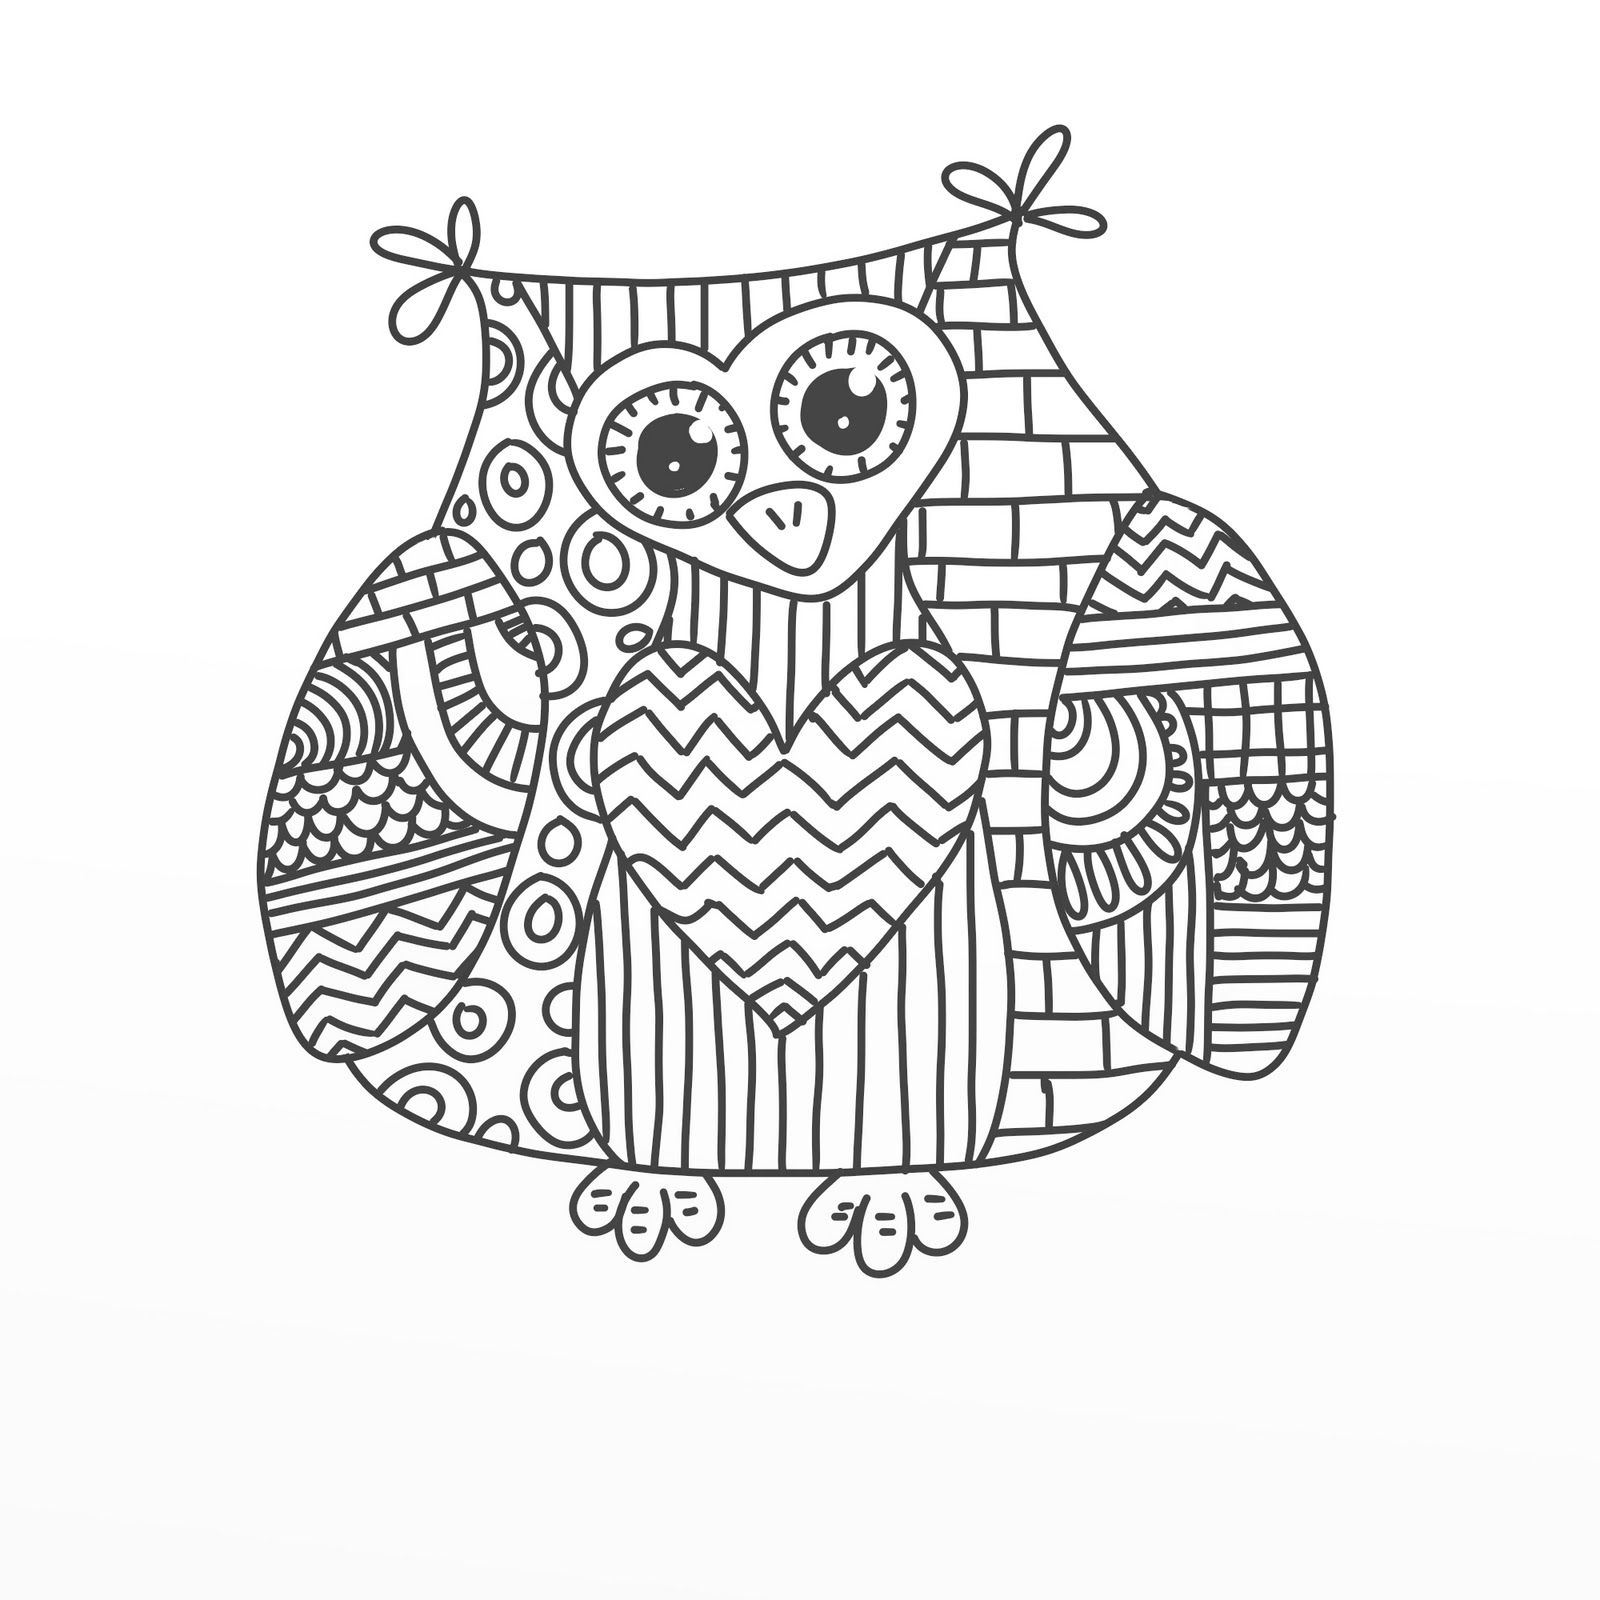 free-printable-owl-coloring-pages-for-adults-choose-your-favorite-coloring-page-and-color-it